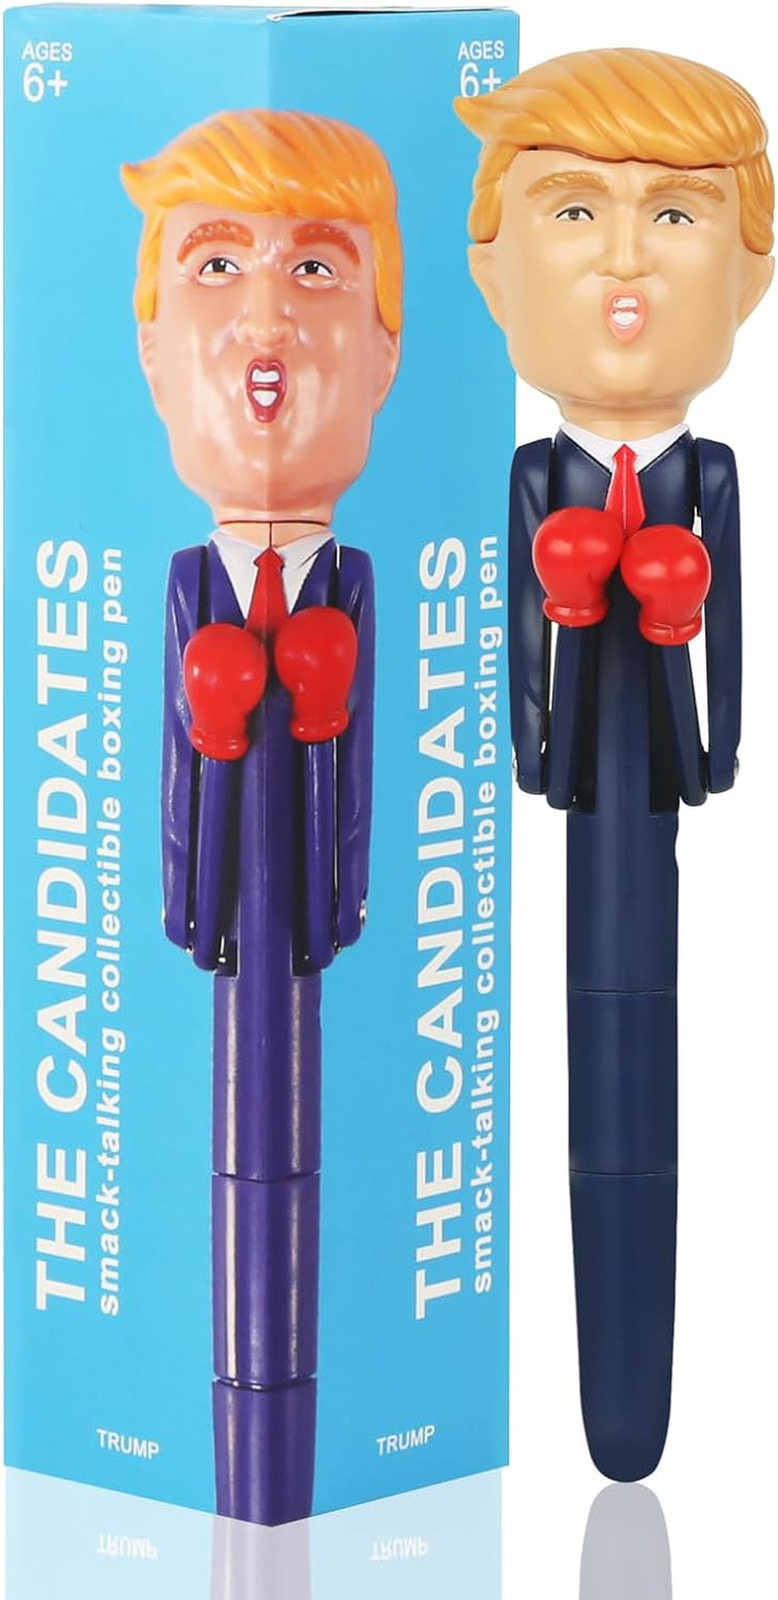 Talking Trump Pen with Real Voice - Funny Trump Gifts for Men - Novelty Gag Gift